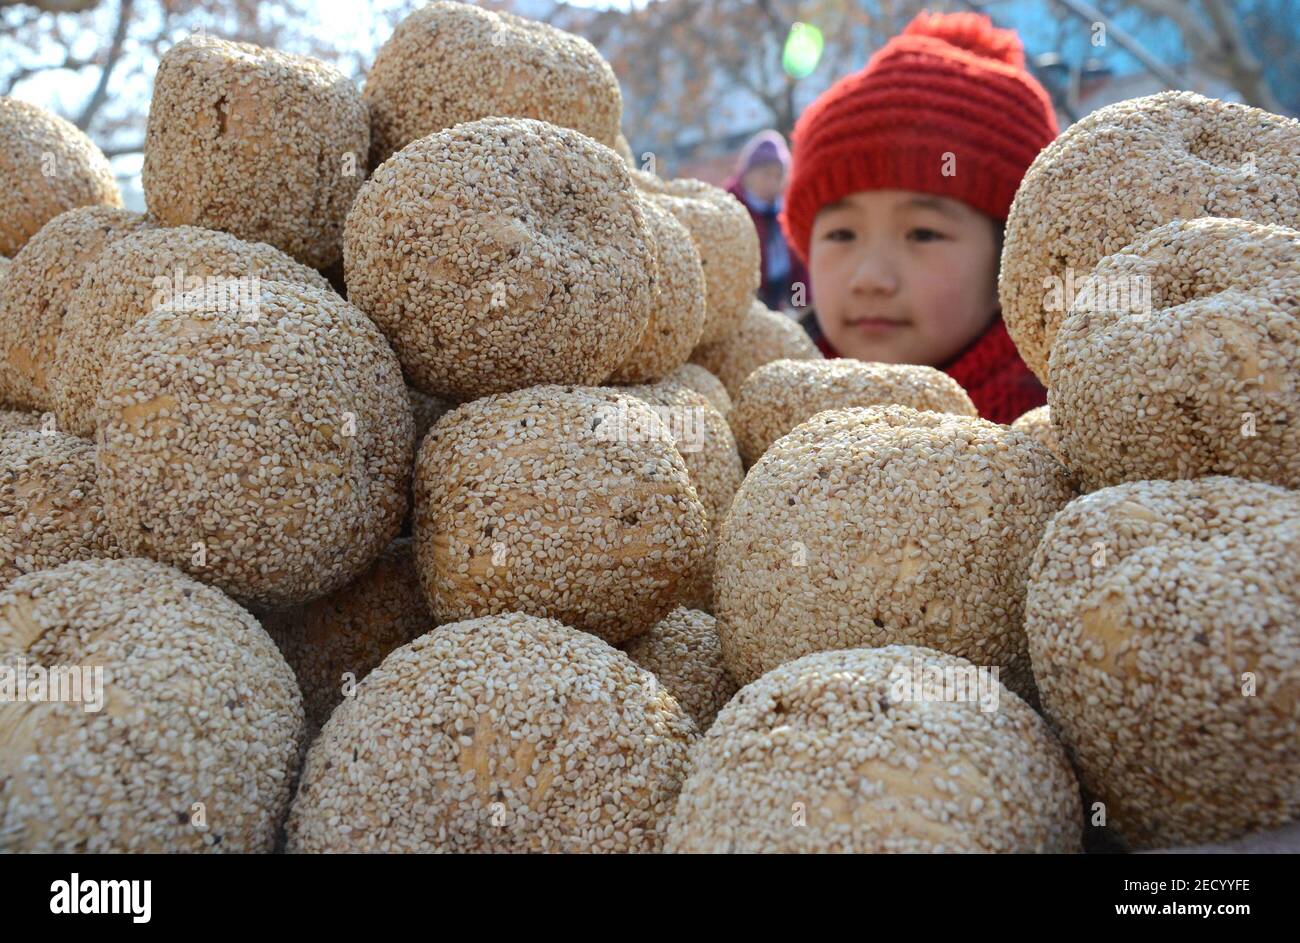 (210214) -- BEIJING, Feb. 14, 2021 (Xinhua) -- A child buys 'sugar melon', a Lunar New Year snack made of malt sugar, glutinous rice and sesame, in Yiyuan County, east China's Shandong Province, Feb. 10, 2015. Lunar New Year ranks among the most important festivals in China, and the celebrations are multifaceted, including food. When the Lunar New Year comes, people across China make a variety of snacks which they believe will bring good fortune. (Photo by Zhao Dongshan/Xinhua) Stock Photo